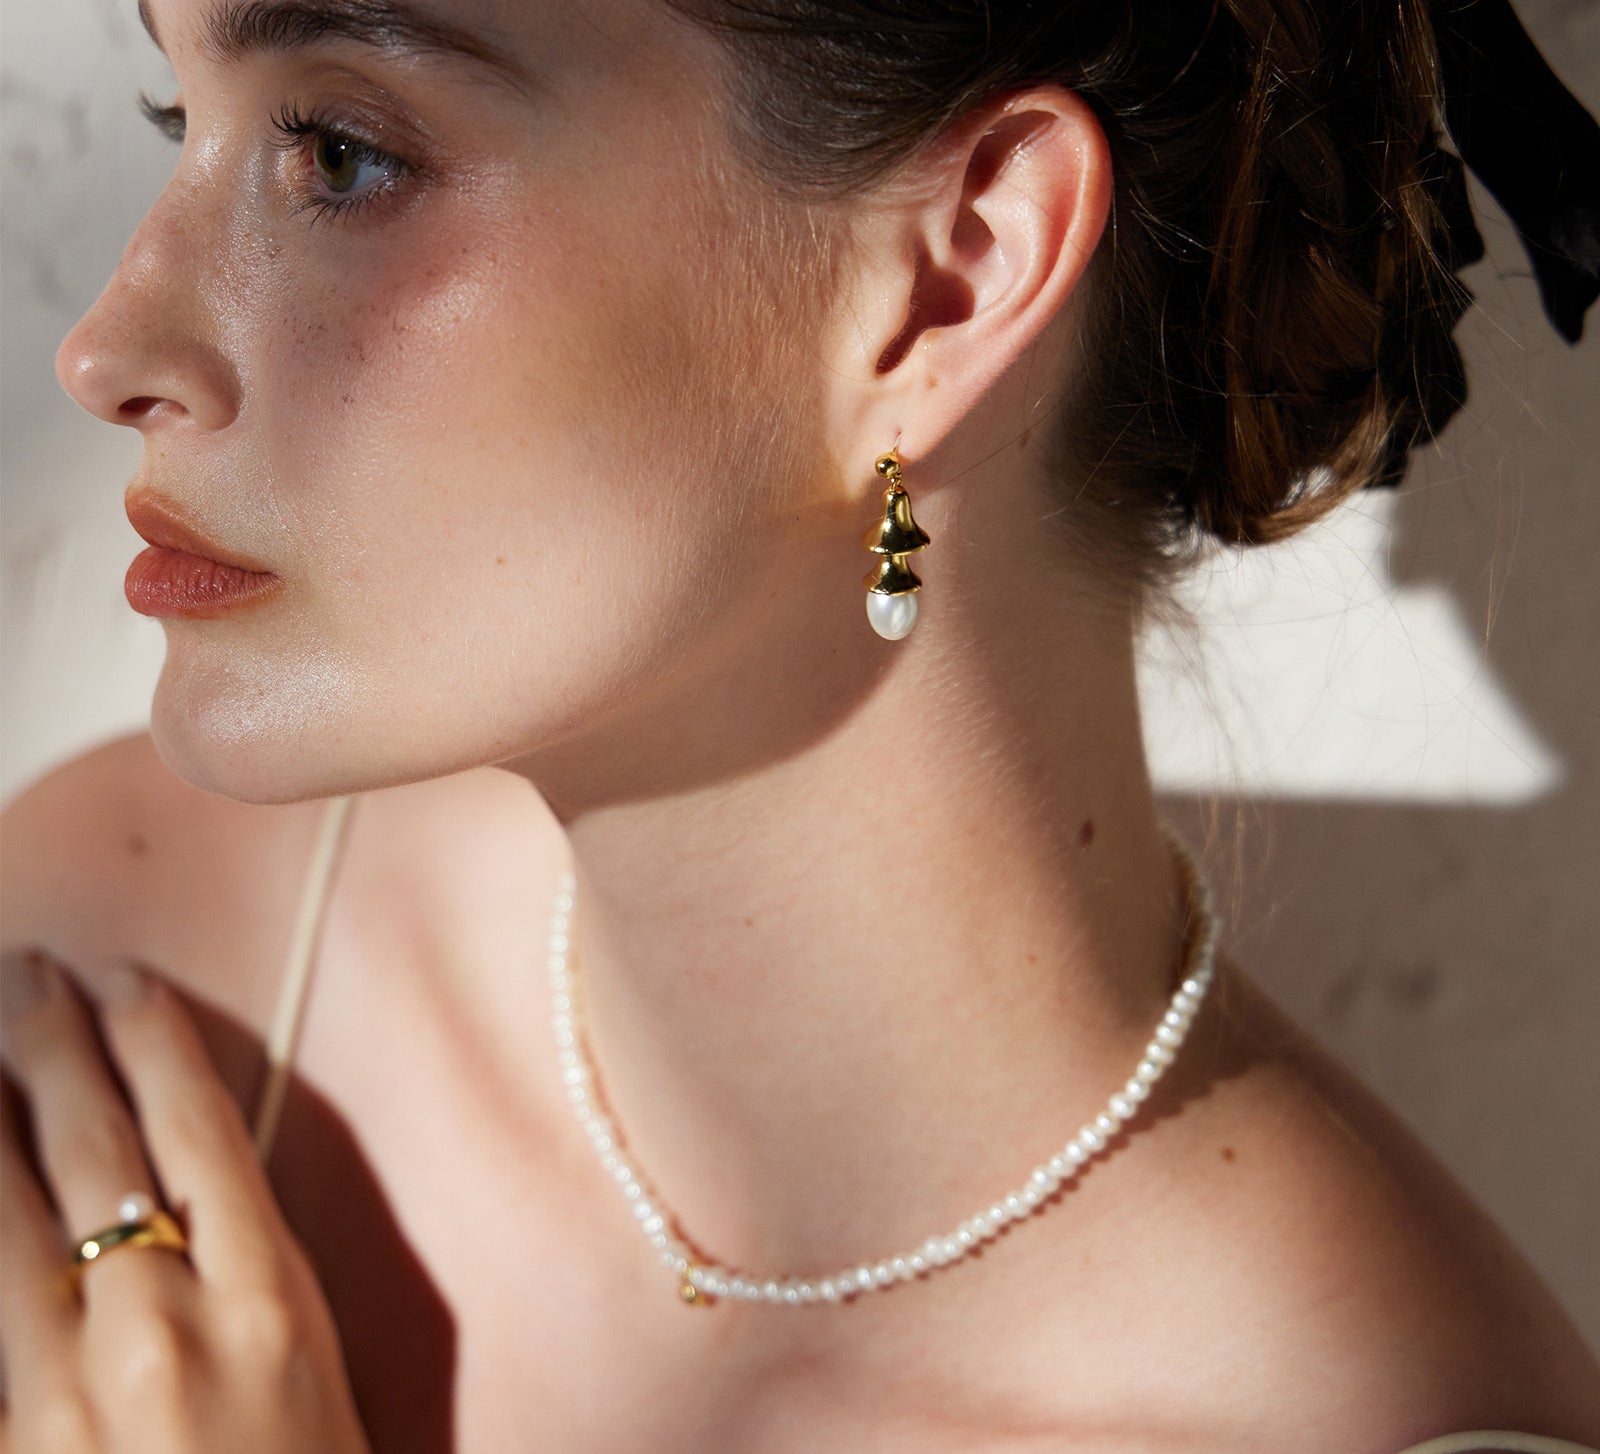 Pearl Drop Earrings in Gold featuring classic pearl adornments and golden accents, these earrings offer a versatile and stylish accessory that complements any outfit with grace.